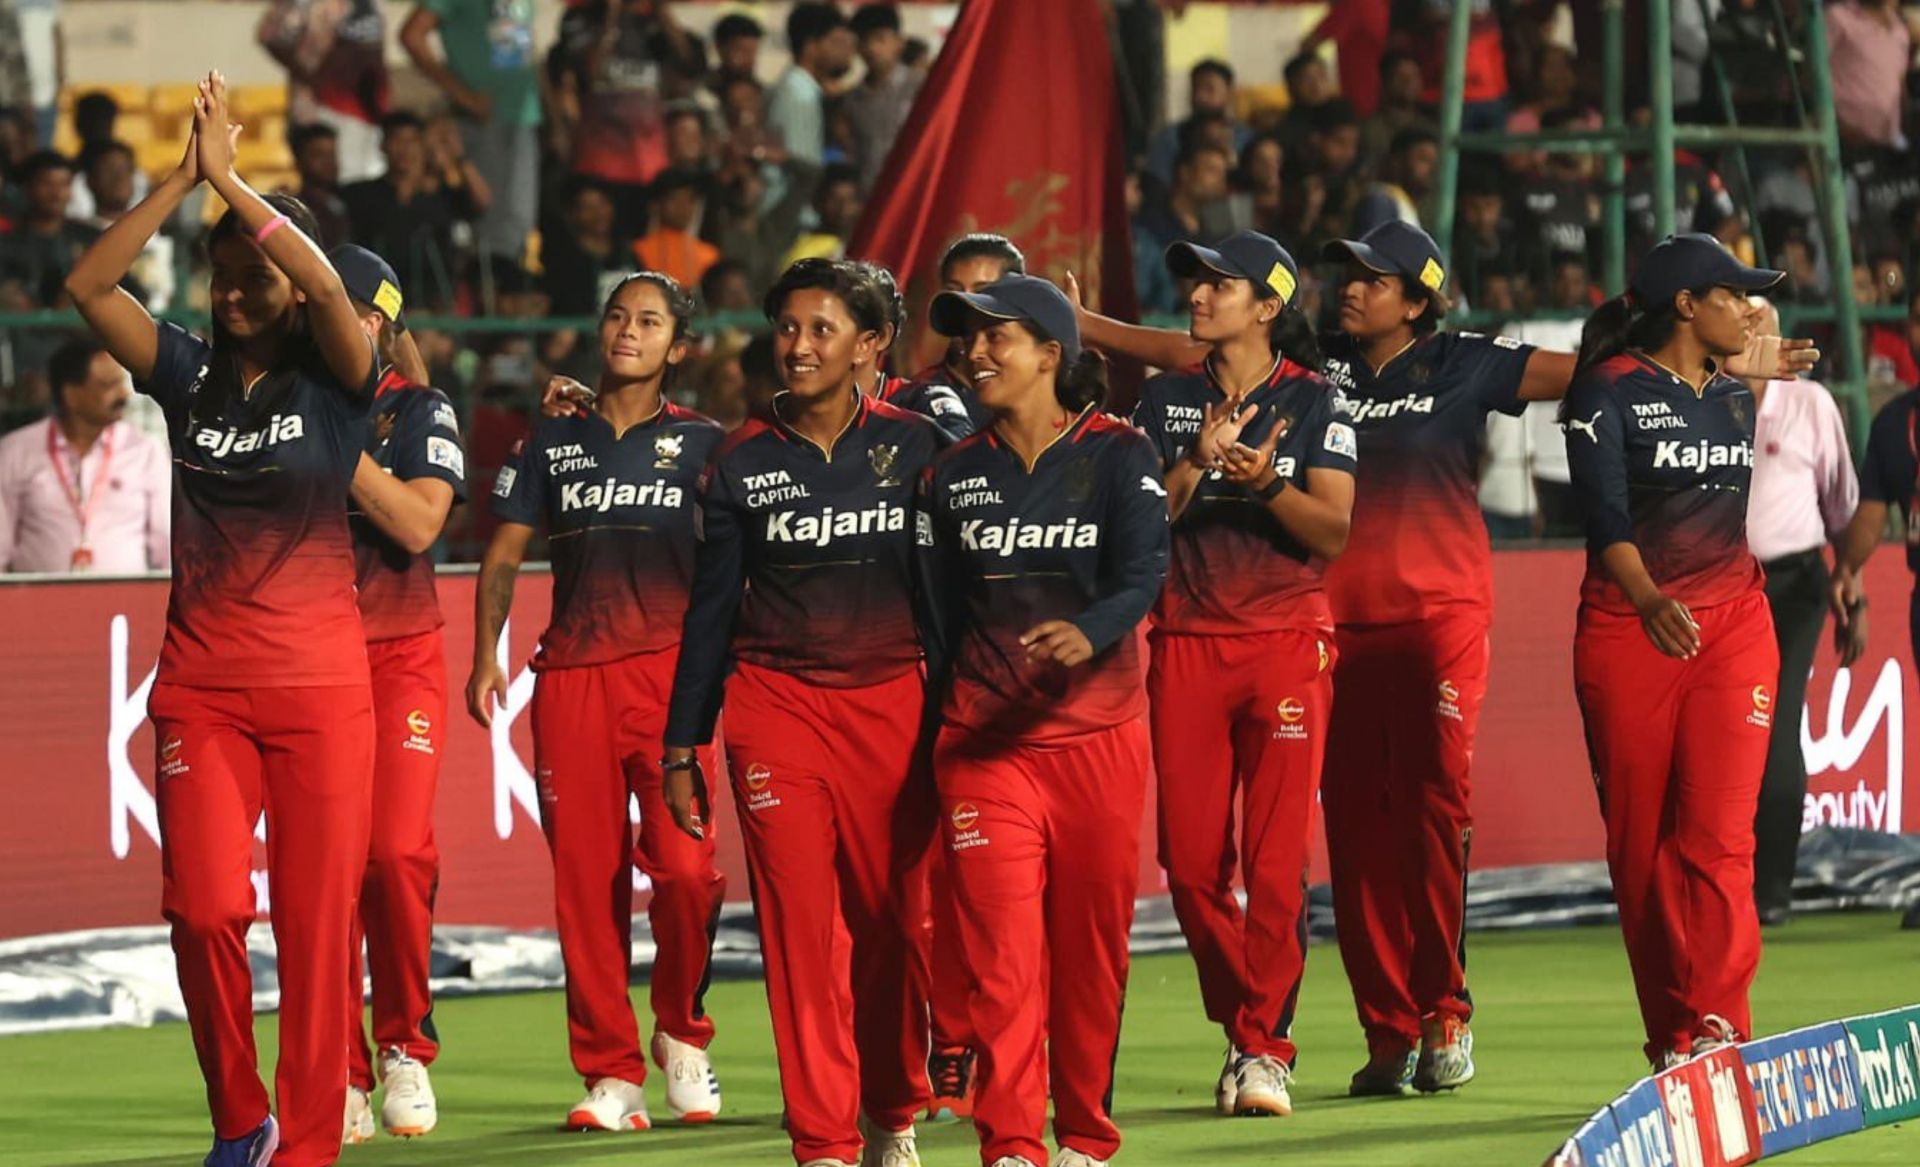 RCB players after the win against UPW on Monday night. (Image: RCB/X)